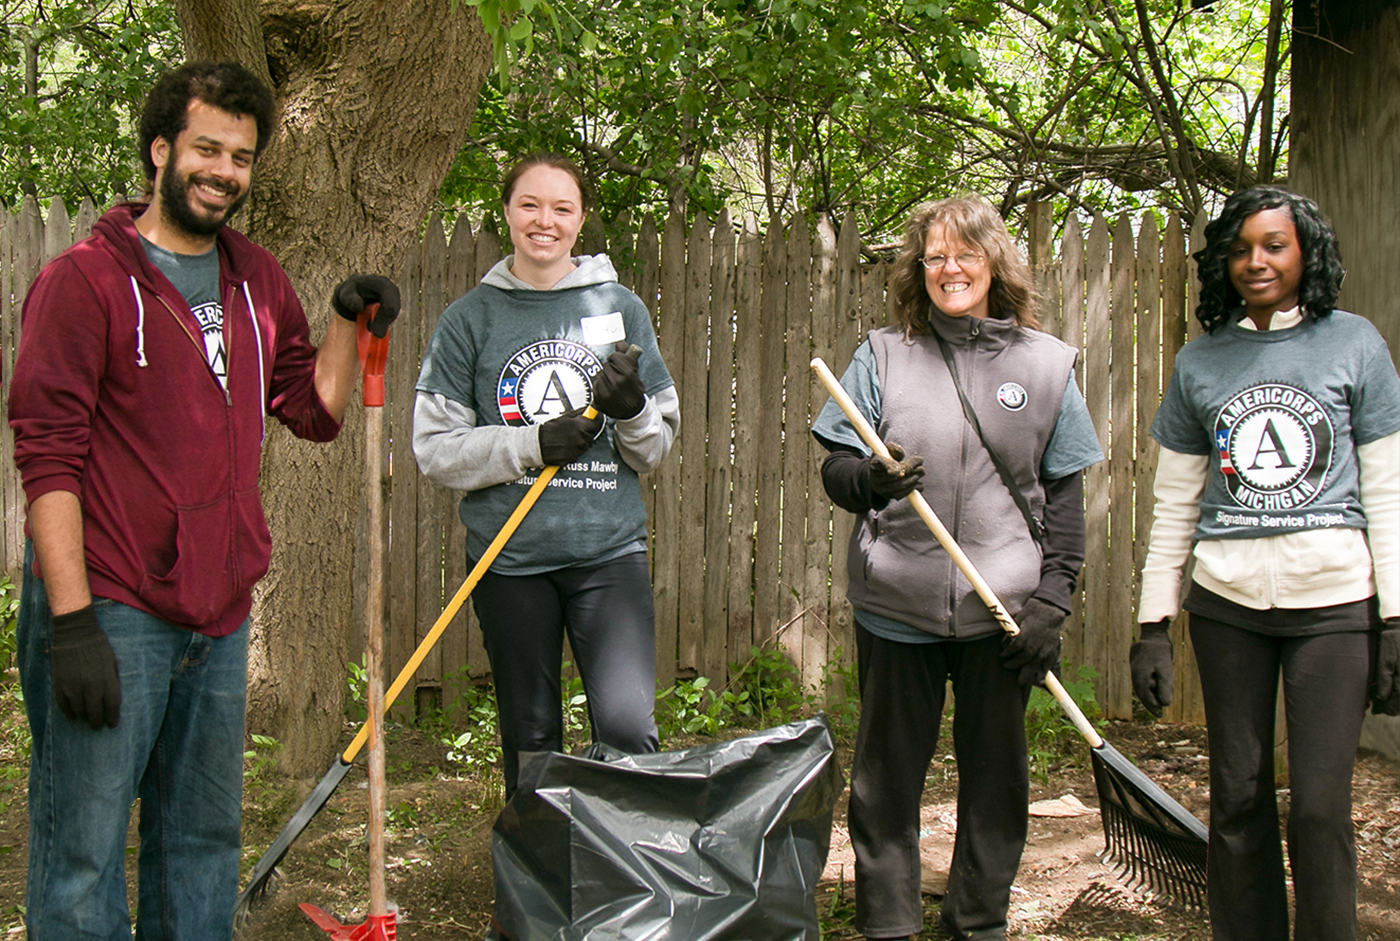 A group of four AmeriCorps members hold rakes as they clean up a yard during a Day of Service.